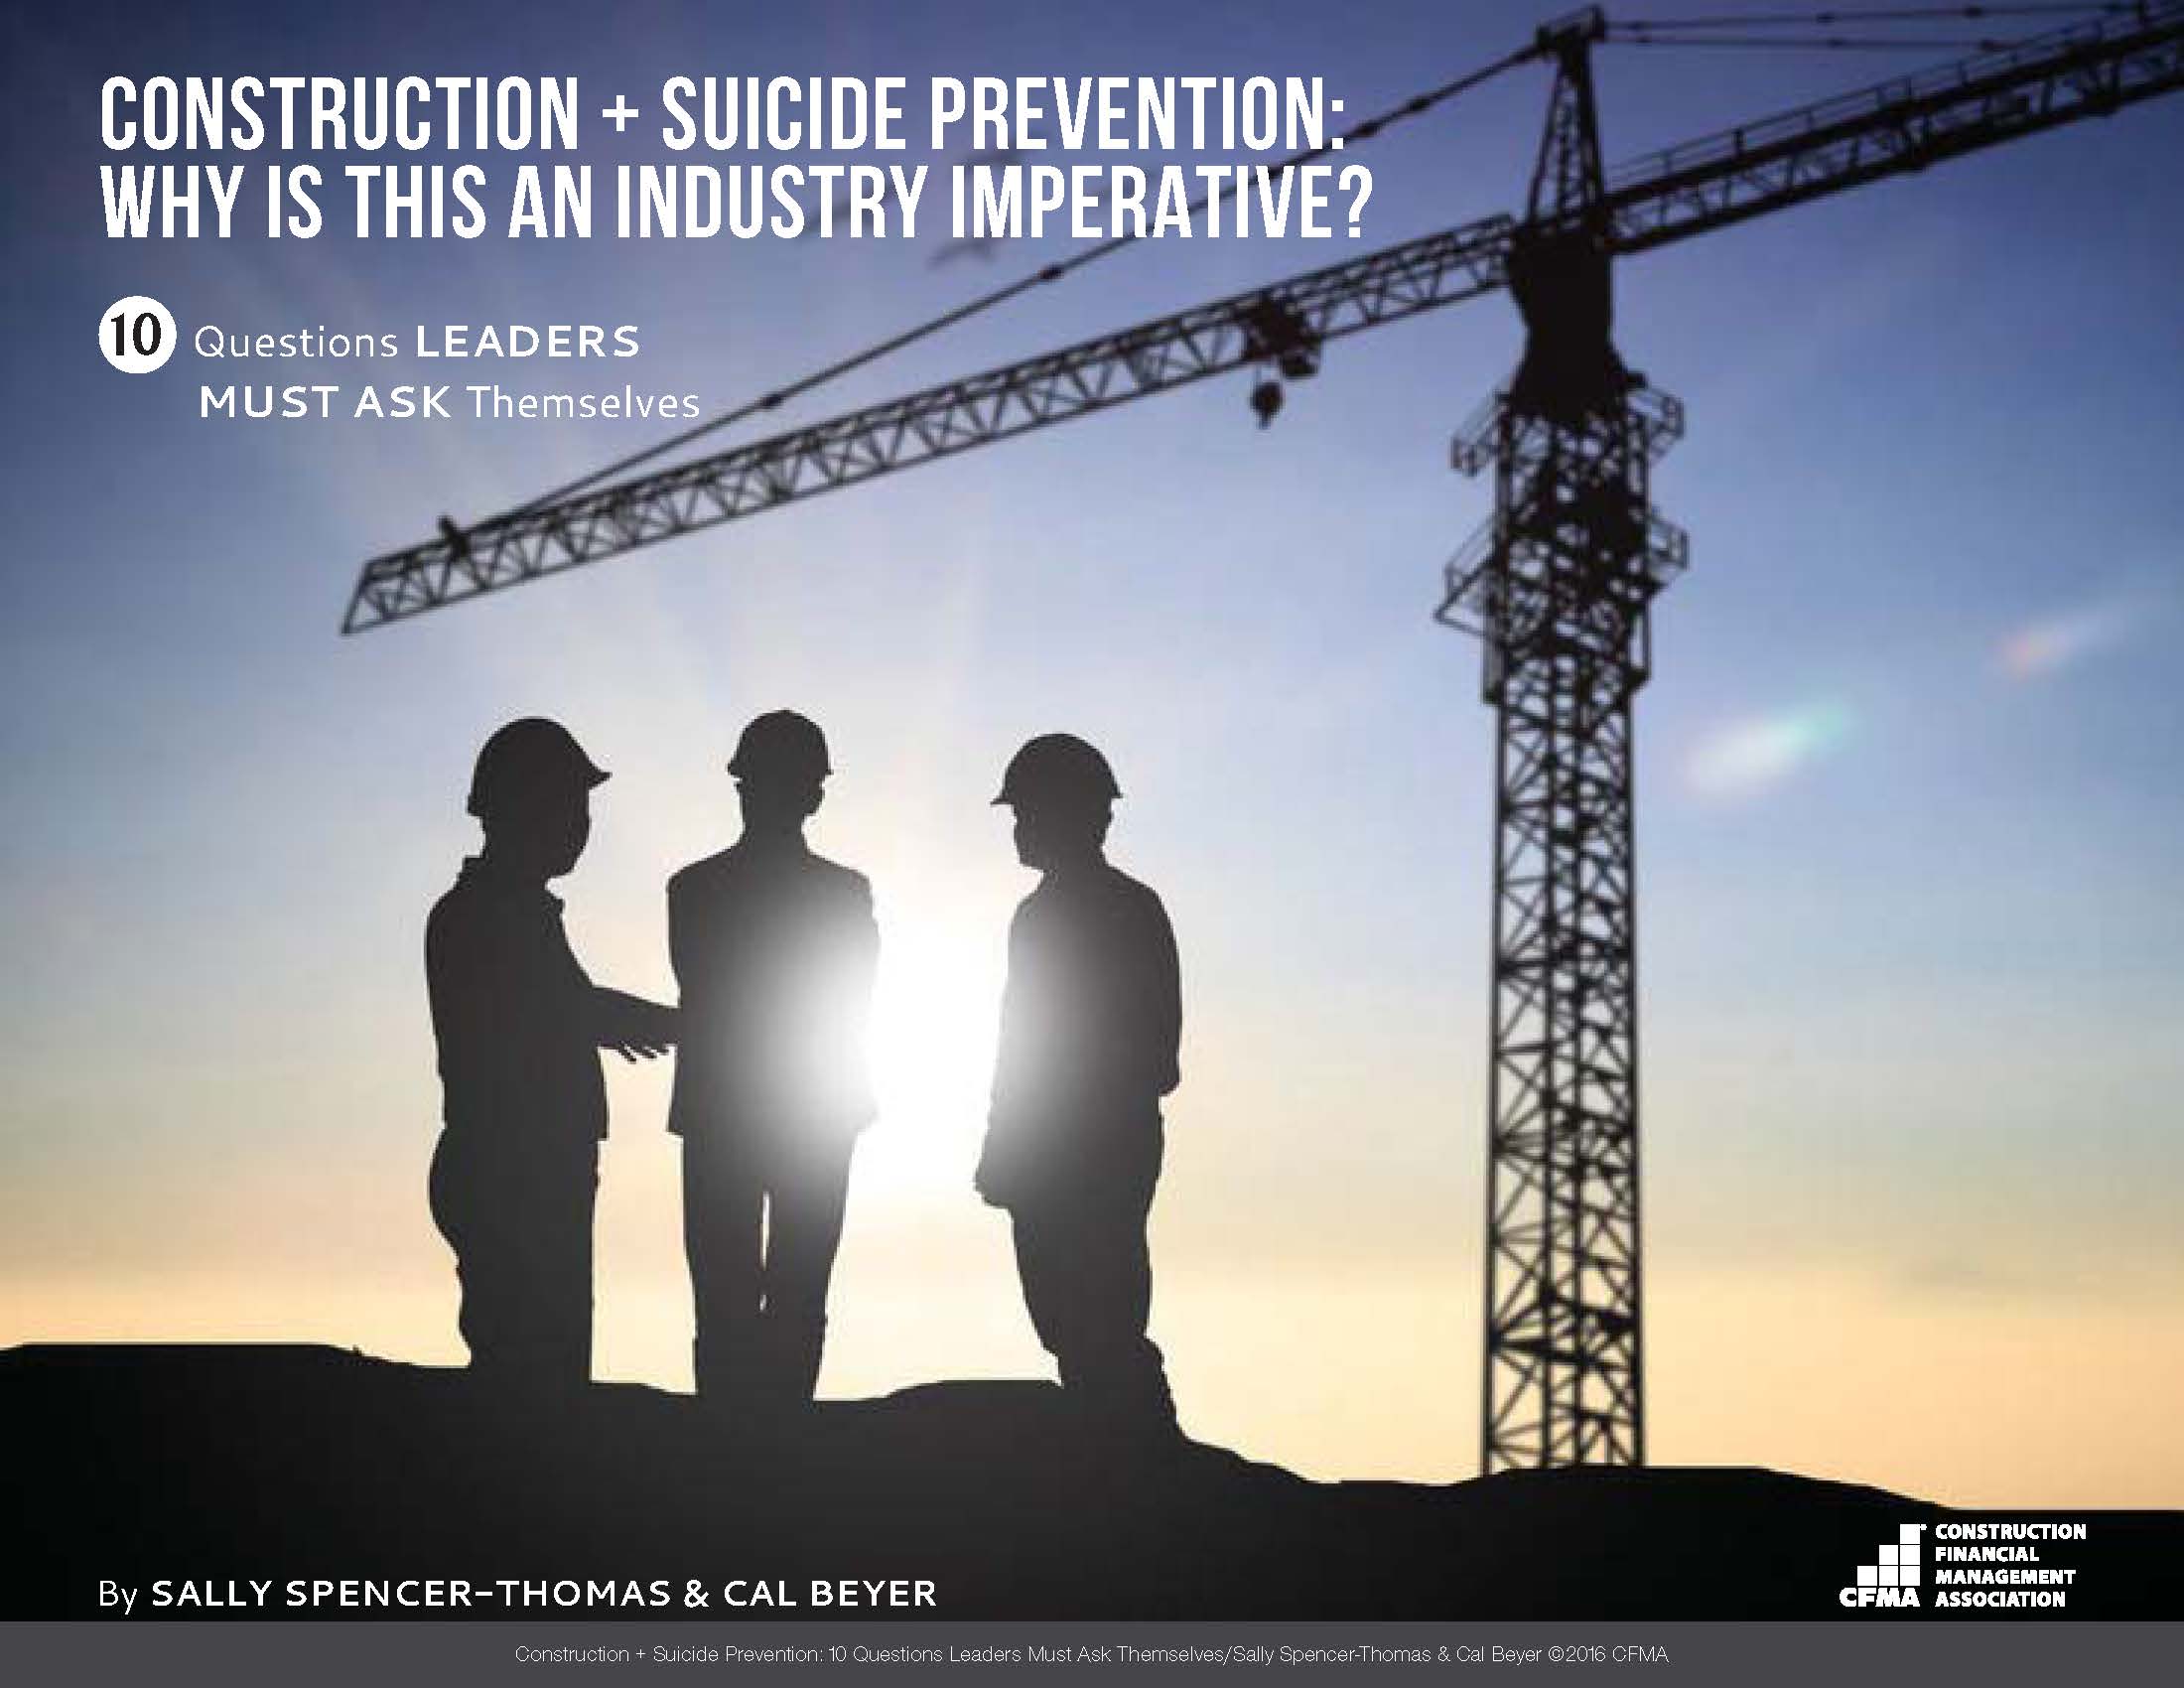 Construction + Suicide Prevention: Why Is this an Industry Imperative?